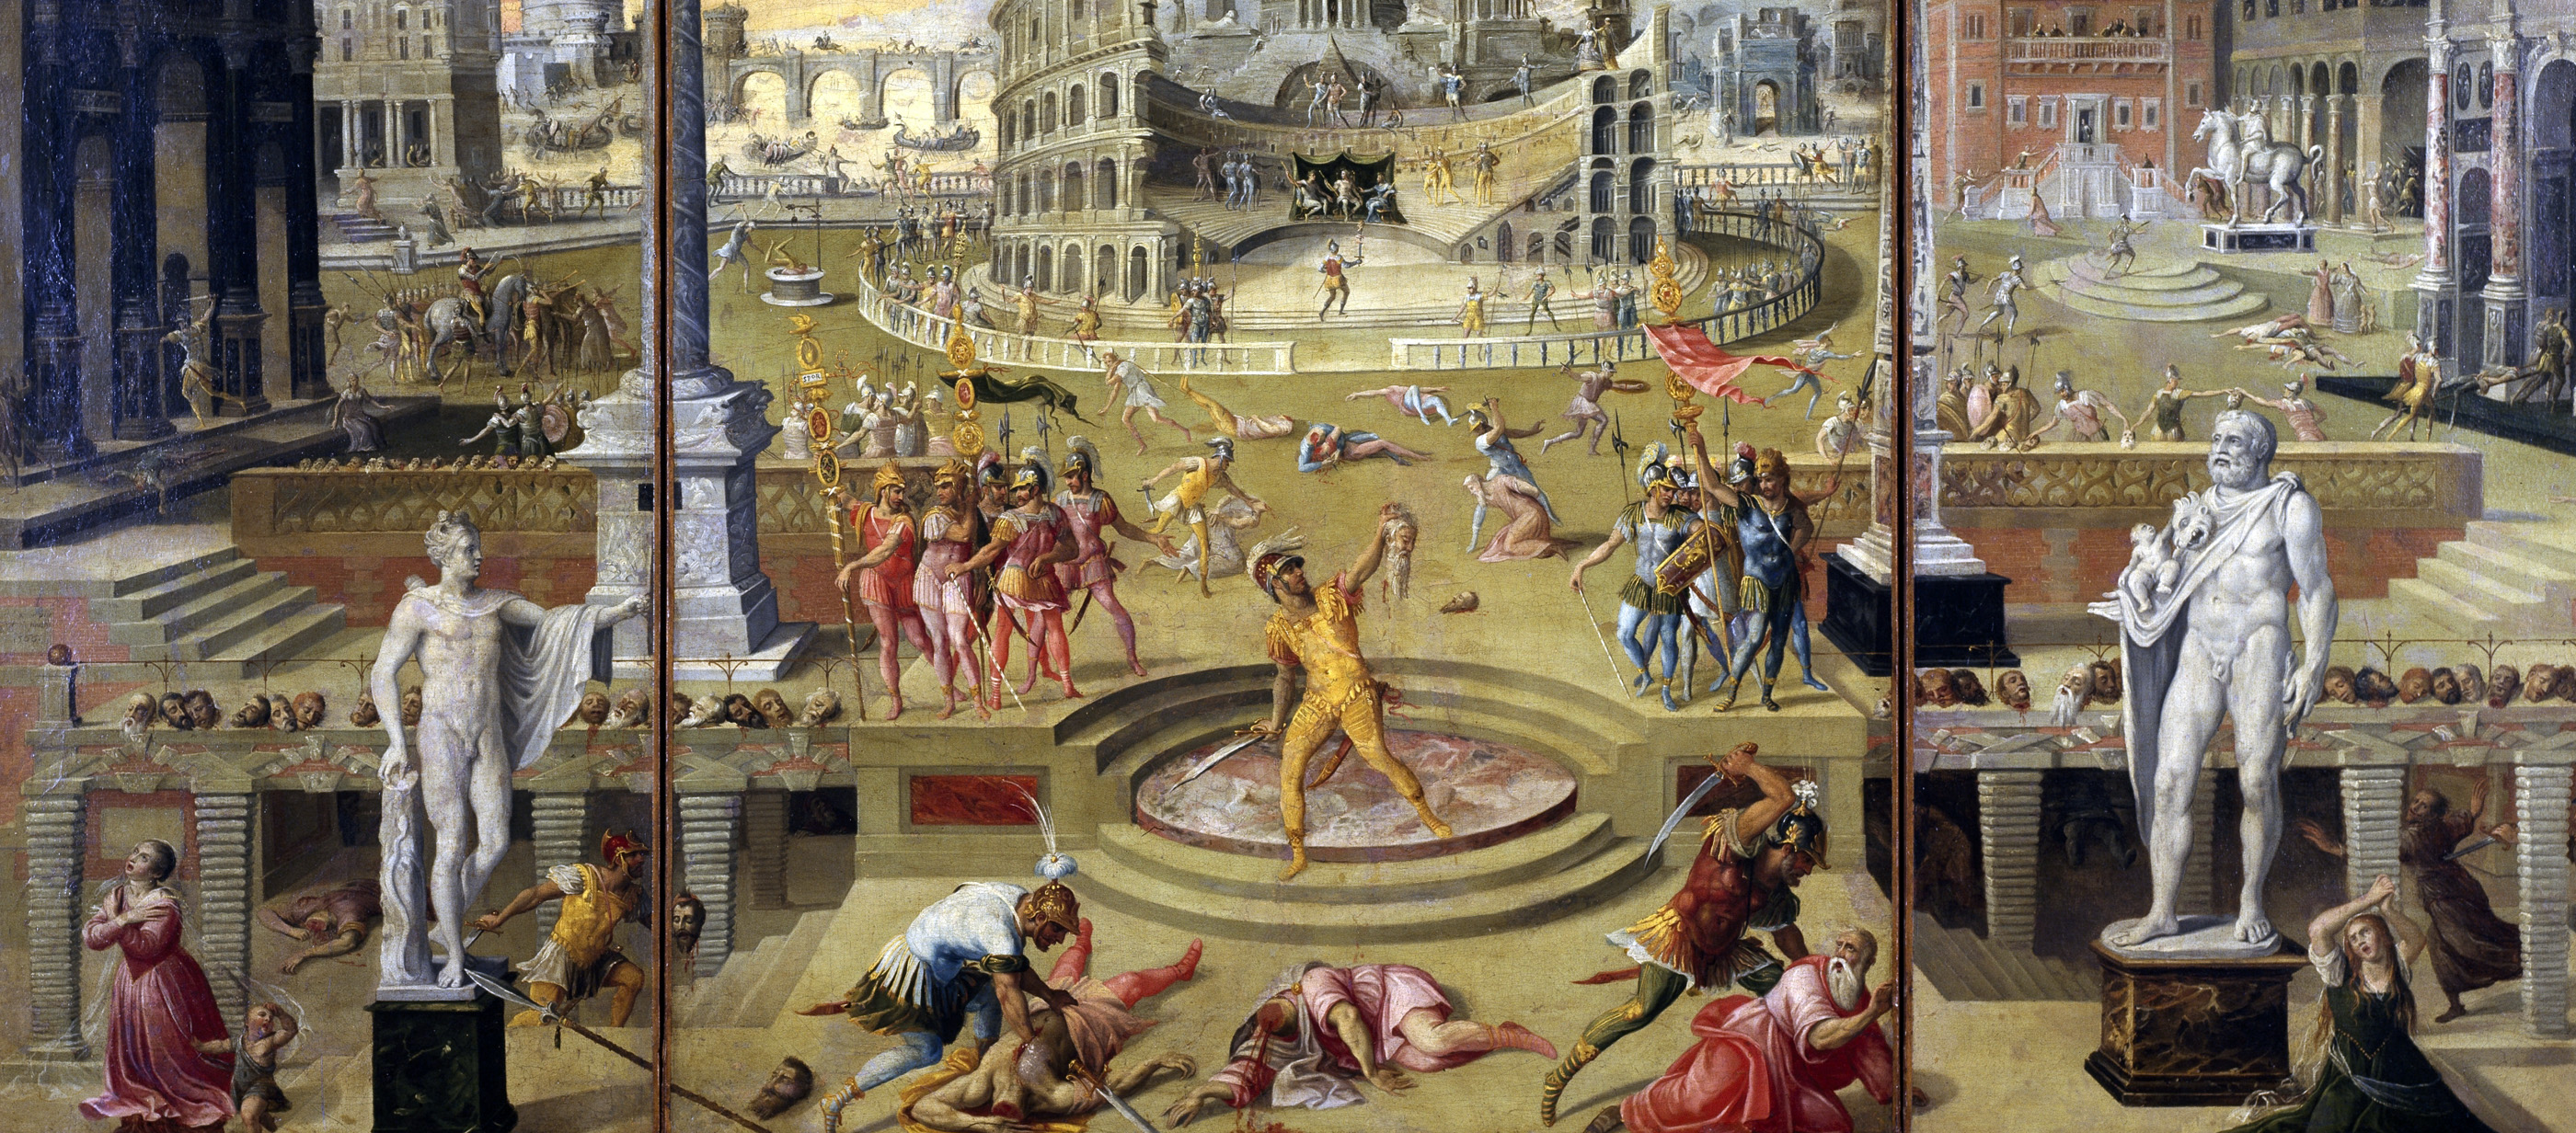 Sixteenth-century painting showing the massacre of Protestants by Catholics. 